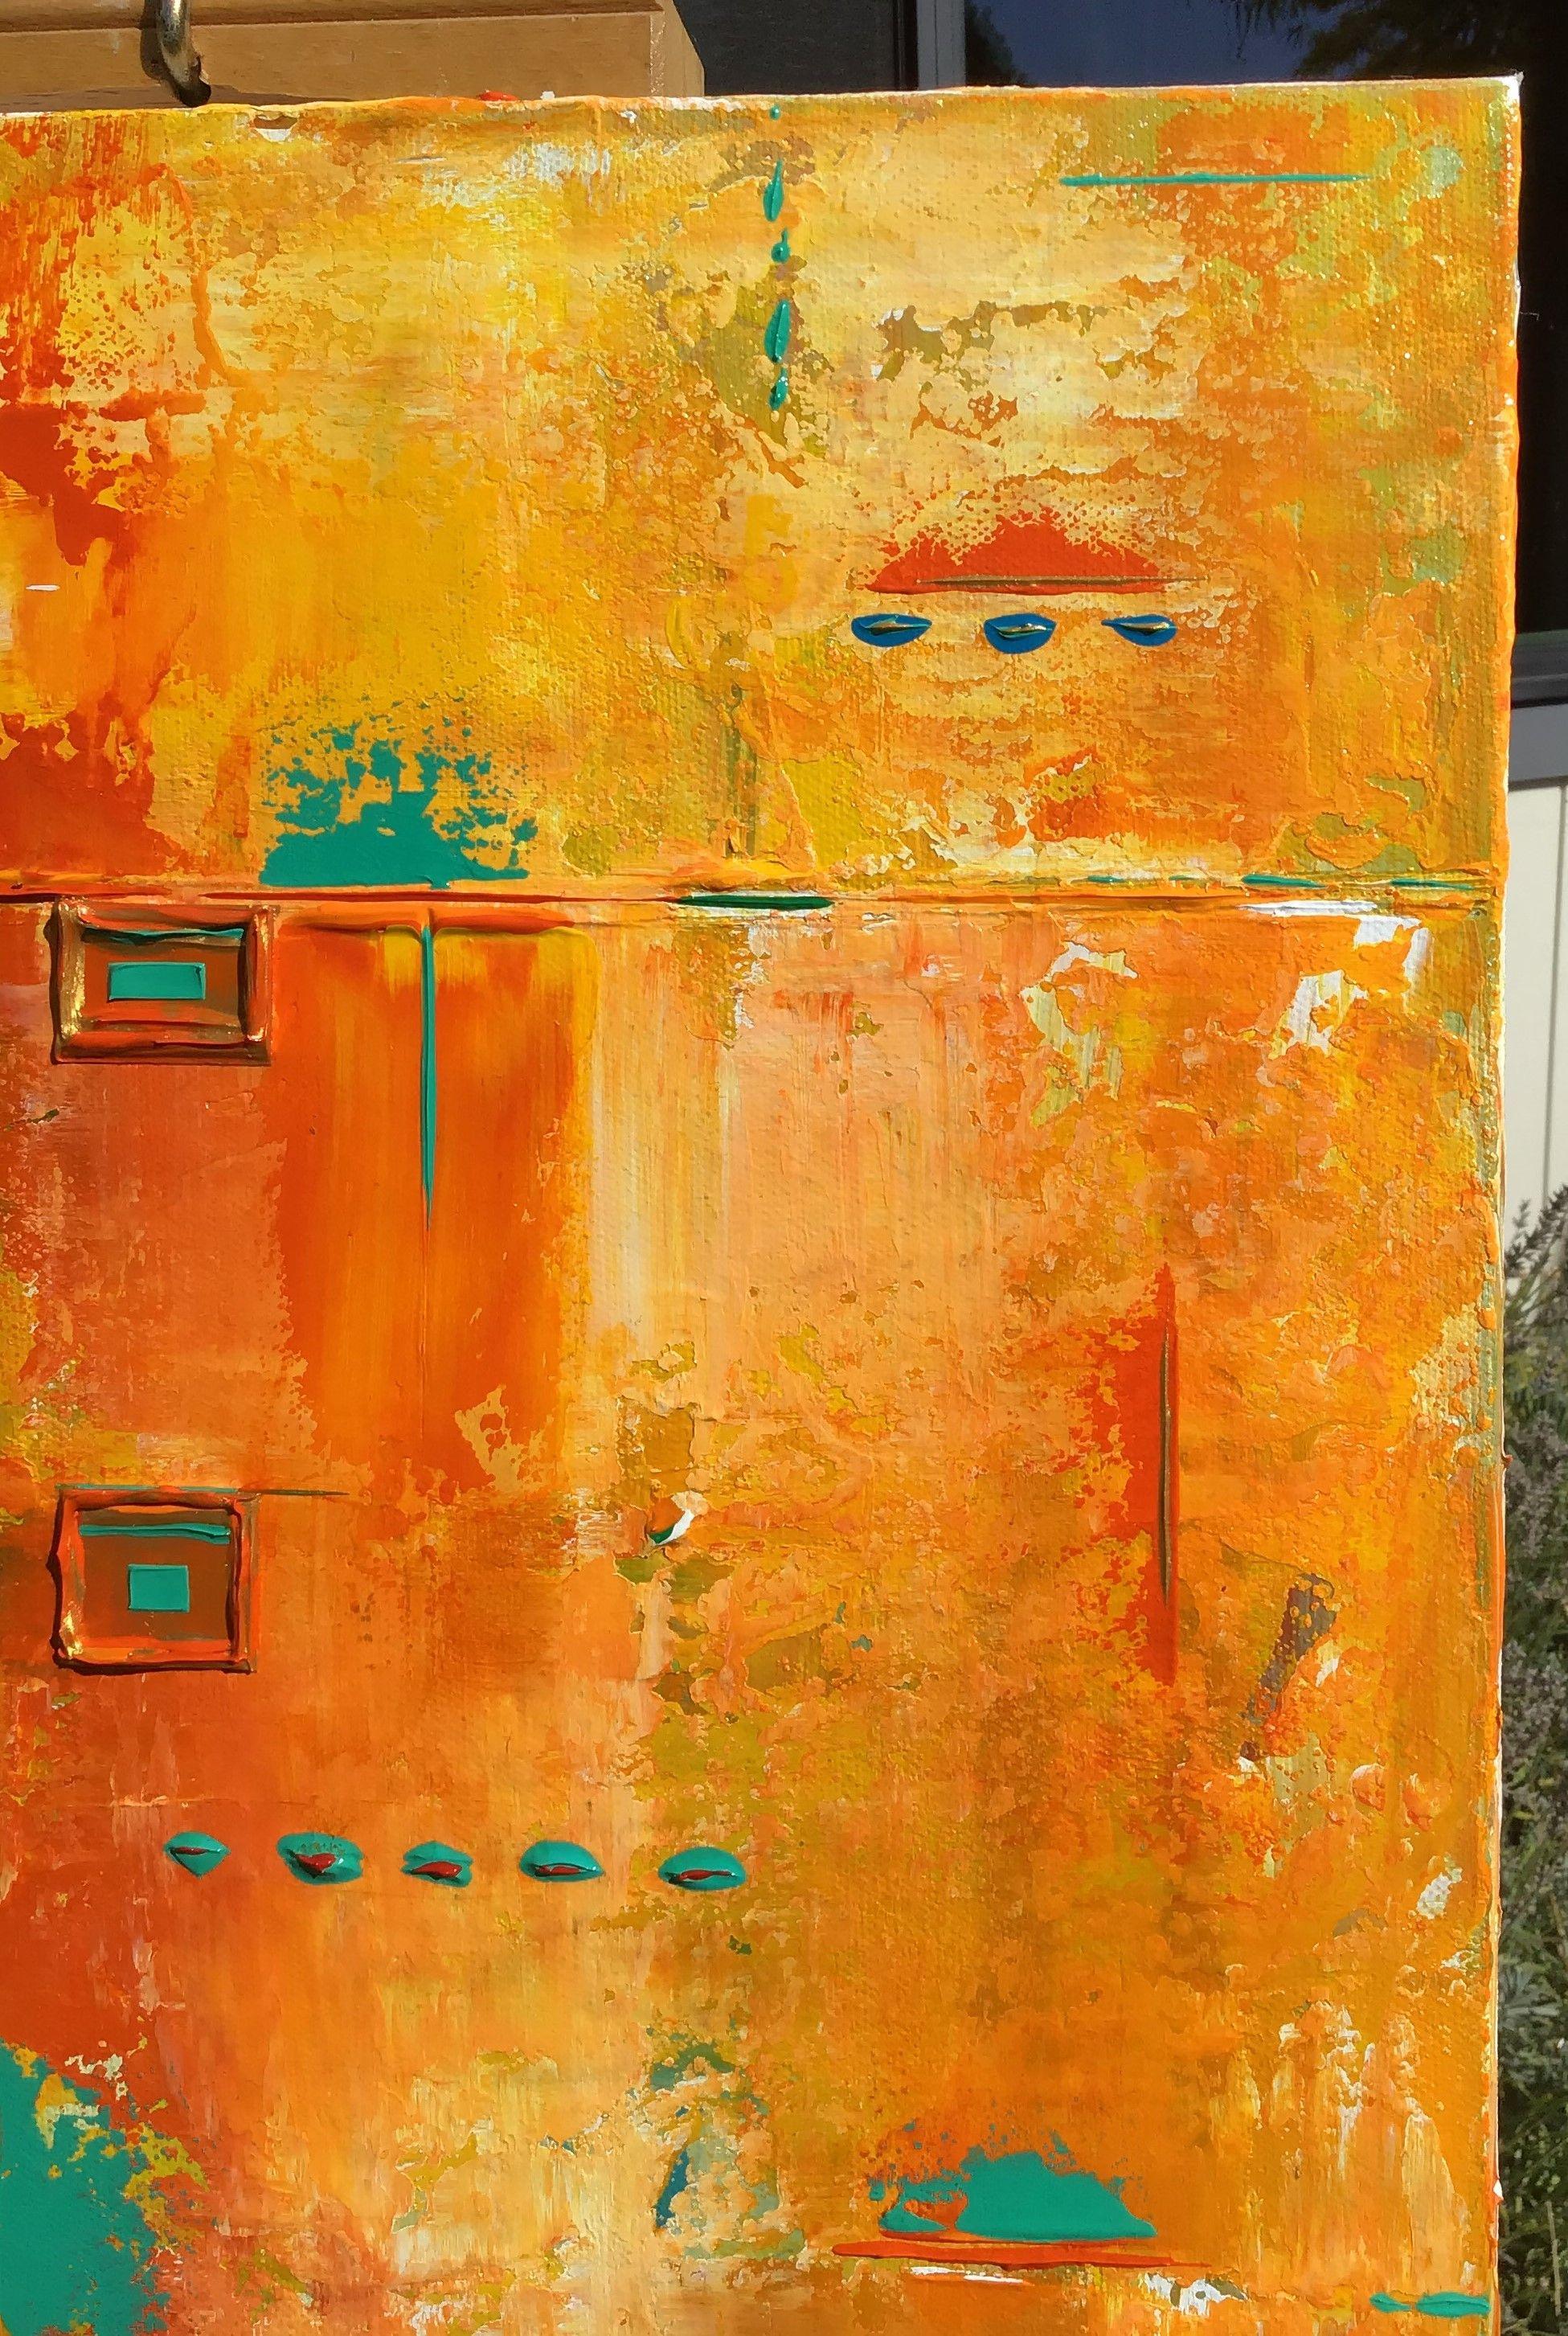 Abstract Perspective, Painting, Acrylic on Canvas - Orange Abstract Painting by Robert Lynn